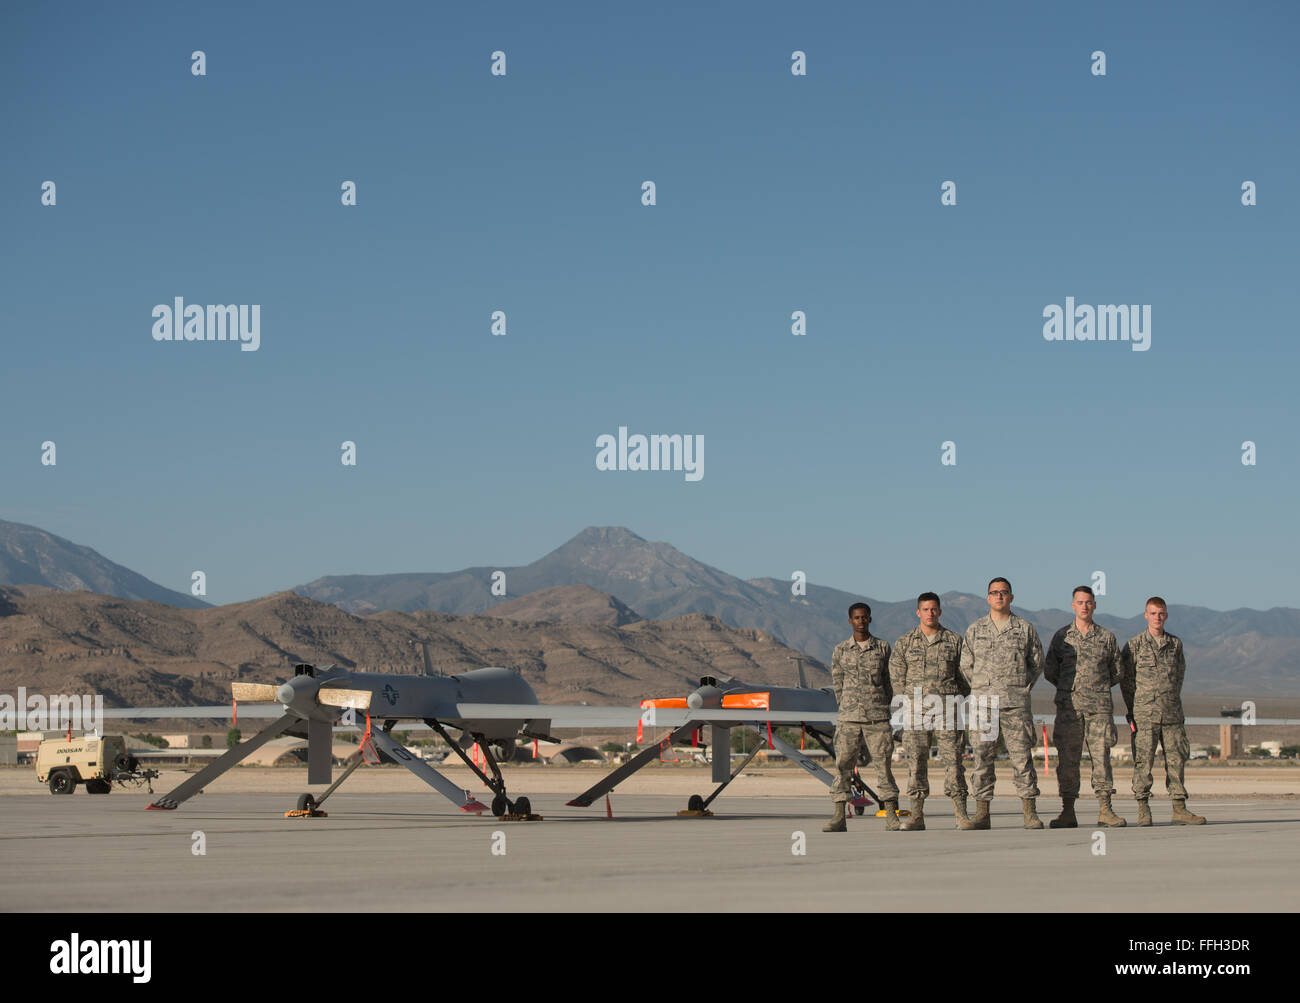 Remotely piloted aircraft maintainers assigned to the 432nd Aircraft Maintenance Squadron stand together after pushing two MQ-9 Reapers into parking spaces at Creech Air Force Base, Nevada. RPA maintainers manually park the aircraft in designated locations to prepare them for future missions. More than 100 personnel are involved in launching one RPA mission. Stock Photo